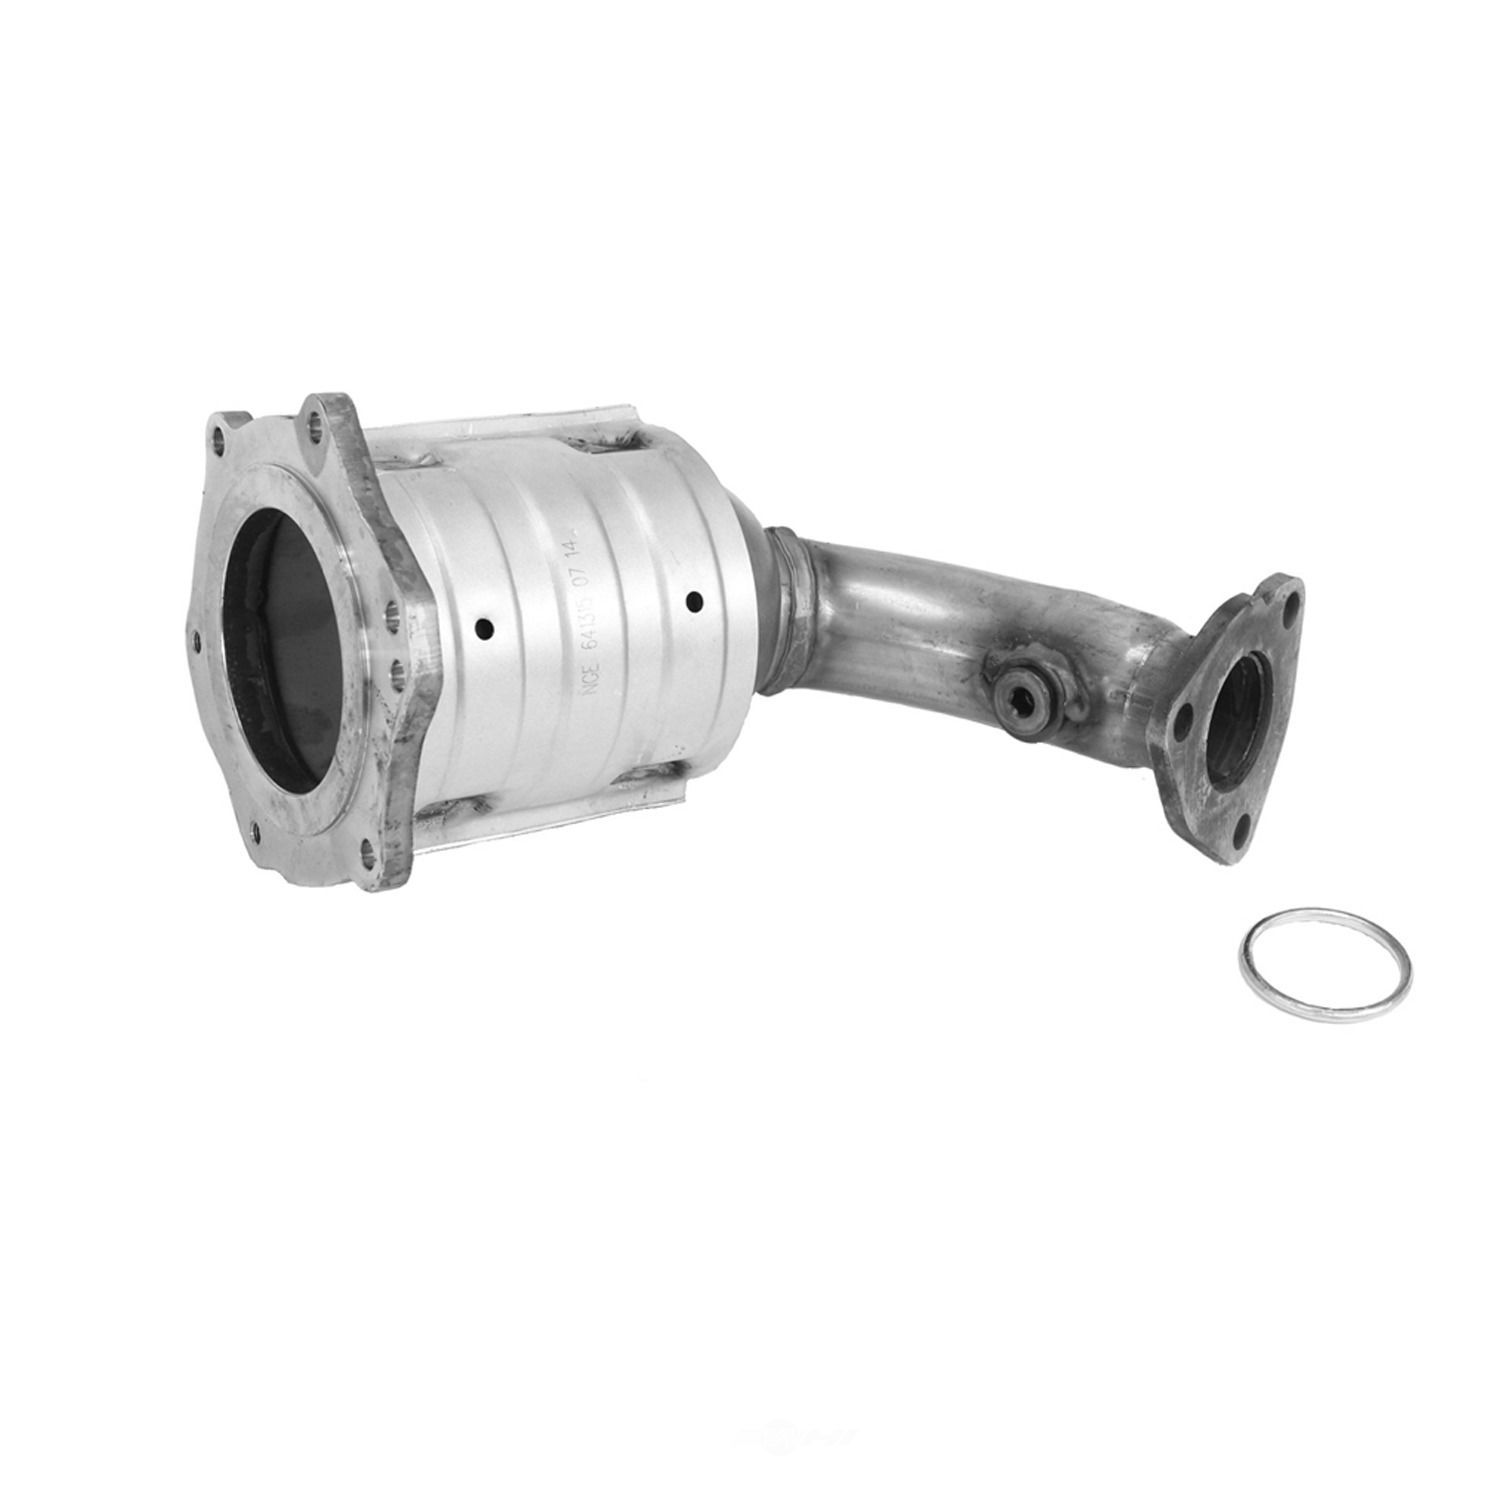 AP EXHAUST FEDERAL CONVERTER - Direct Fit Converter - APG 641315